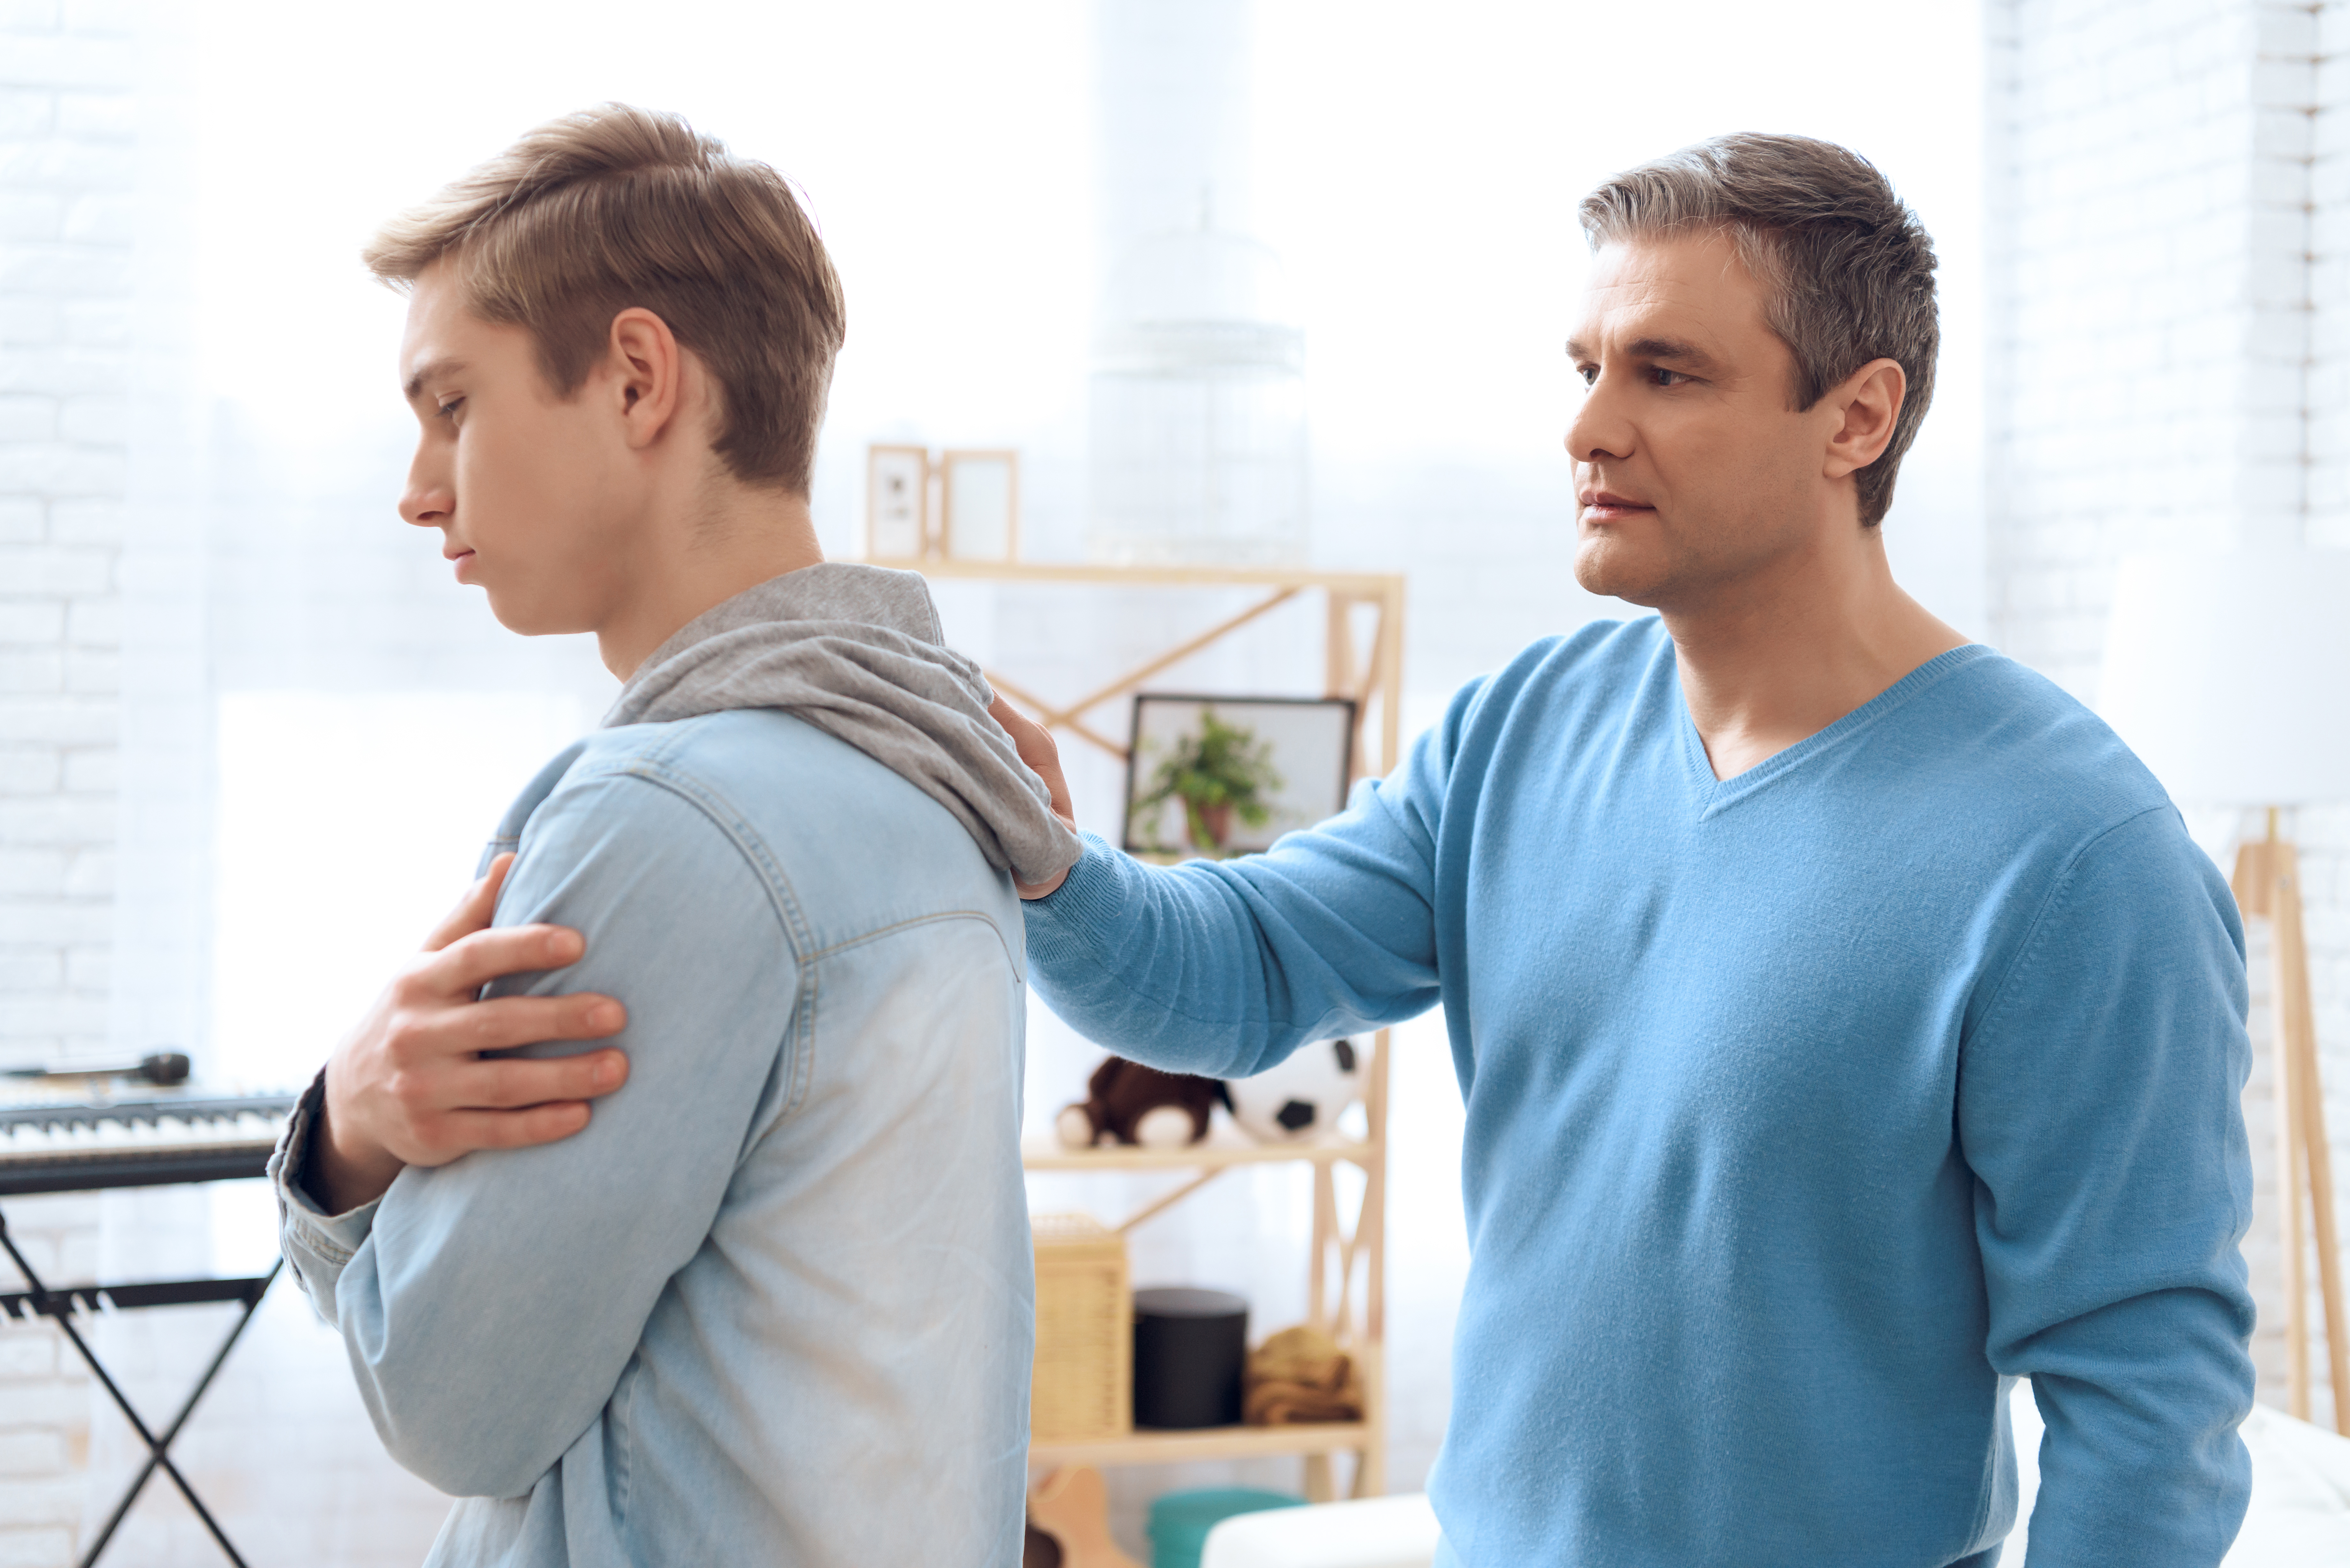 Father tries to talk to his son, but problem teenager is deep in his own thoughts. | Source: Shutterstock